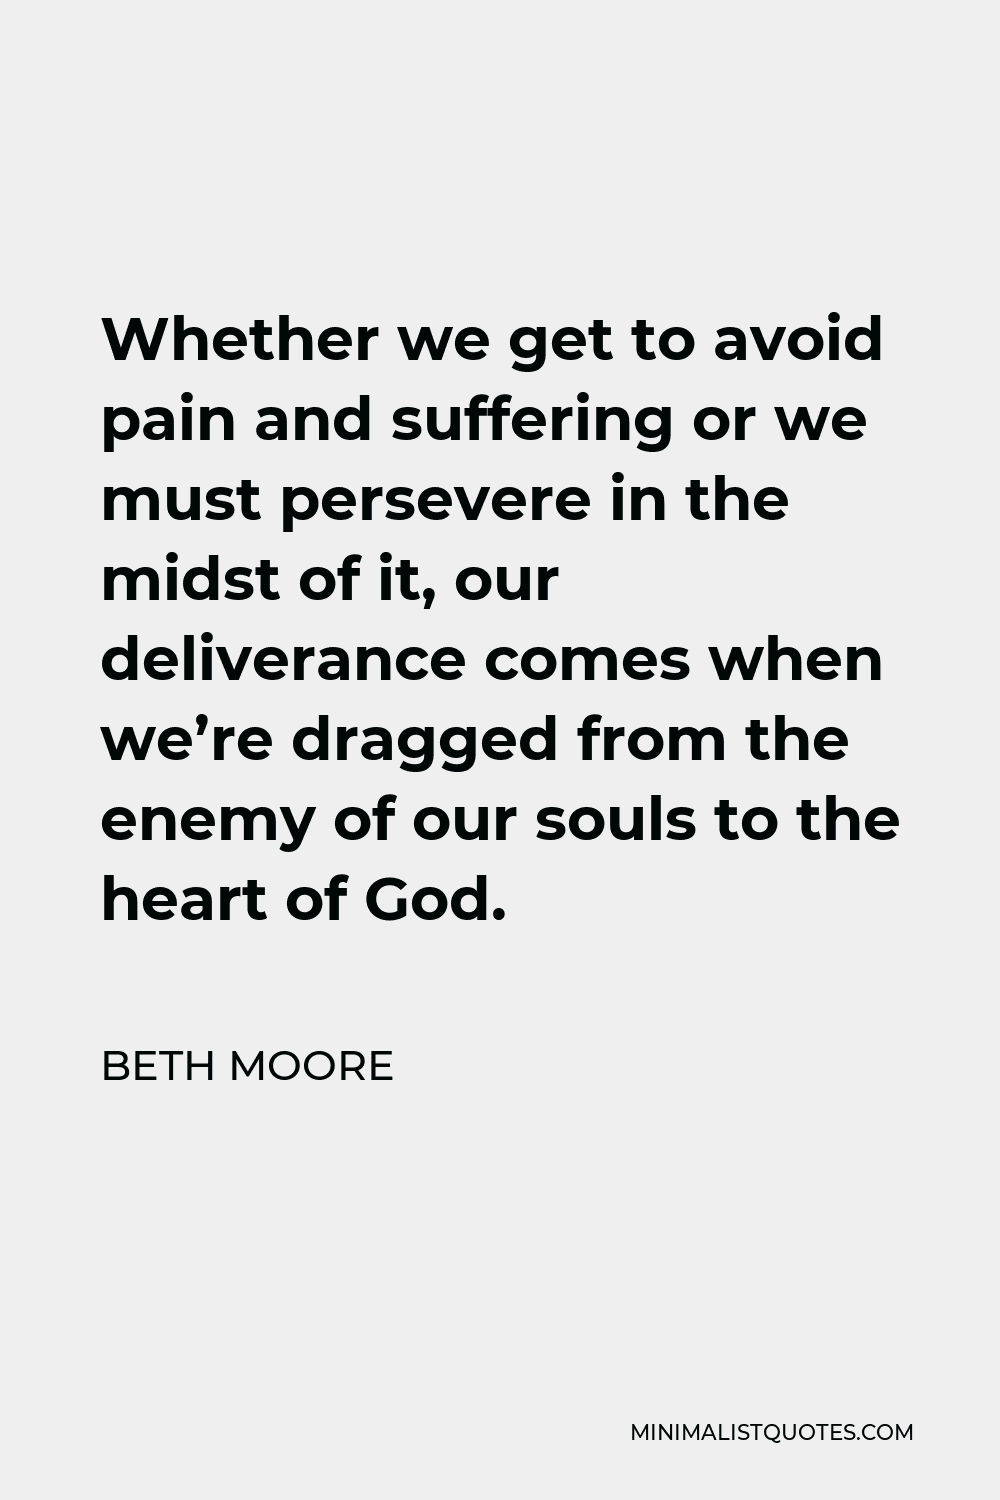 Beth Moore Quote - Whether we get to avoid pain and suffering or we must persevere in the midst of it, our deliverance comes when we’re dragged from the enemy of our souls to the heart of God.